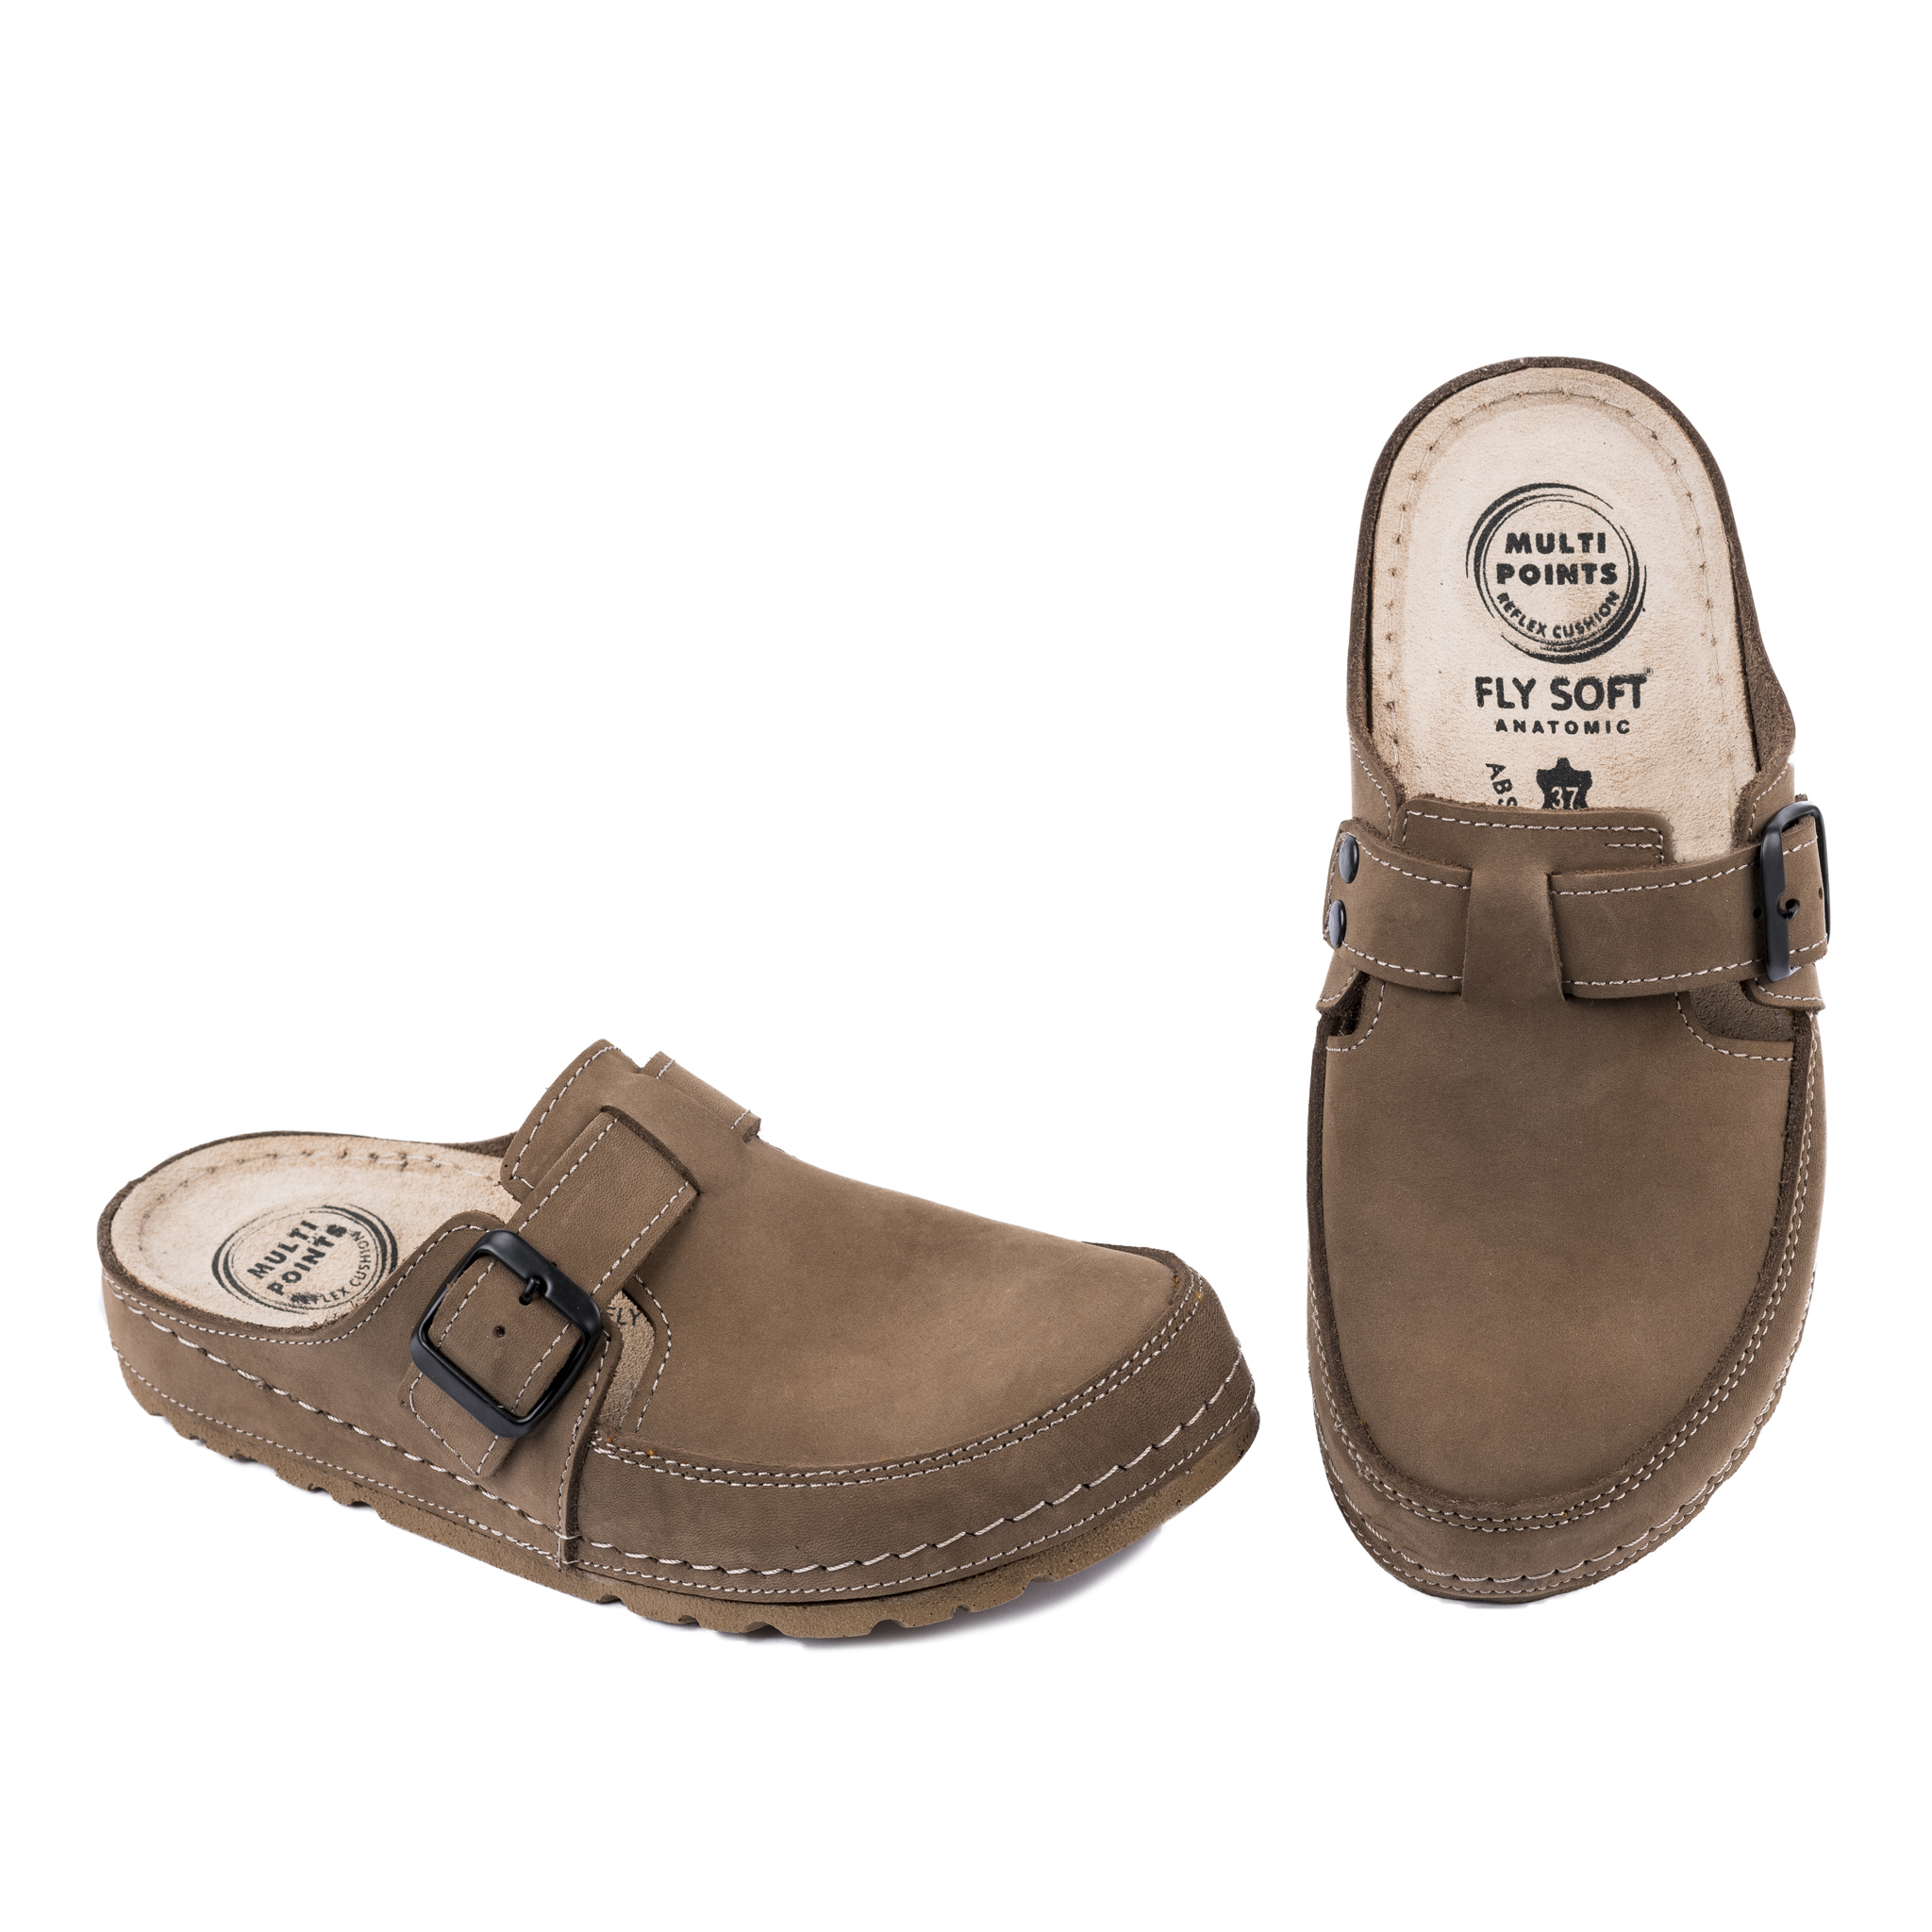 LEATHER CLOGS WITH BELT - BROWN